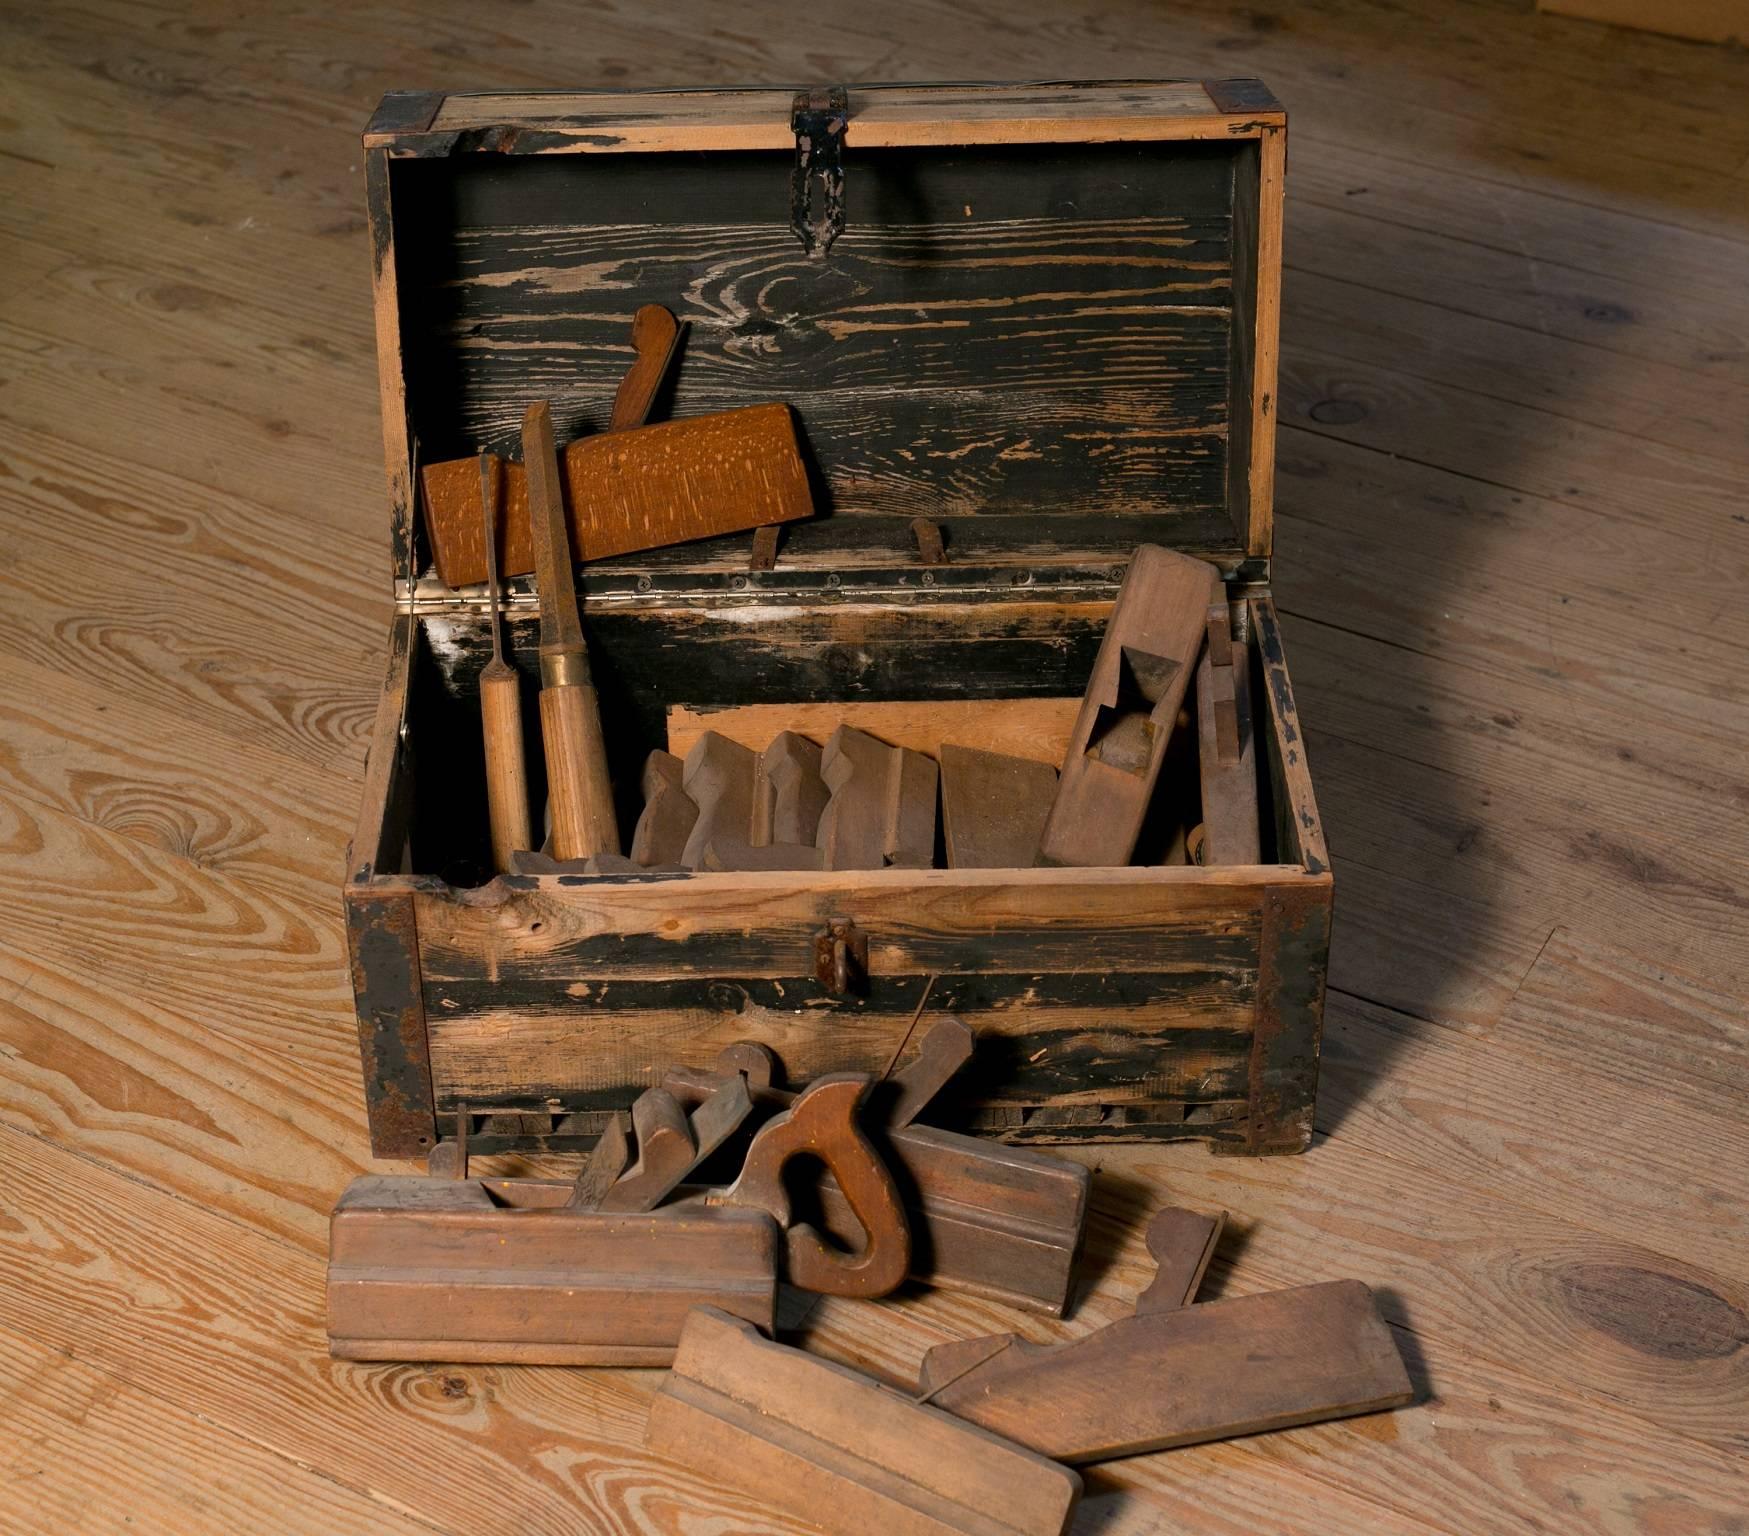 Set of at least 12 woodworking hand tools in zinc topped box. From Belgium, circa 1910. Various sizes. Size listed is the size of the box. The set is charming and makes a nice primitive or industrial display.